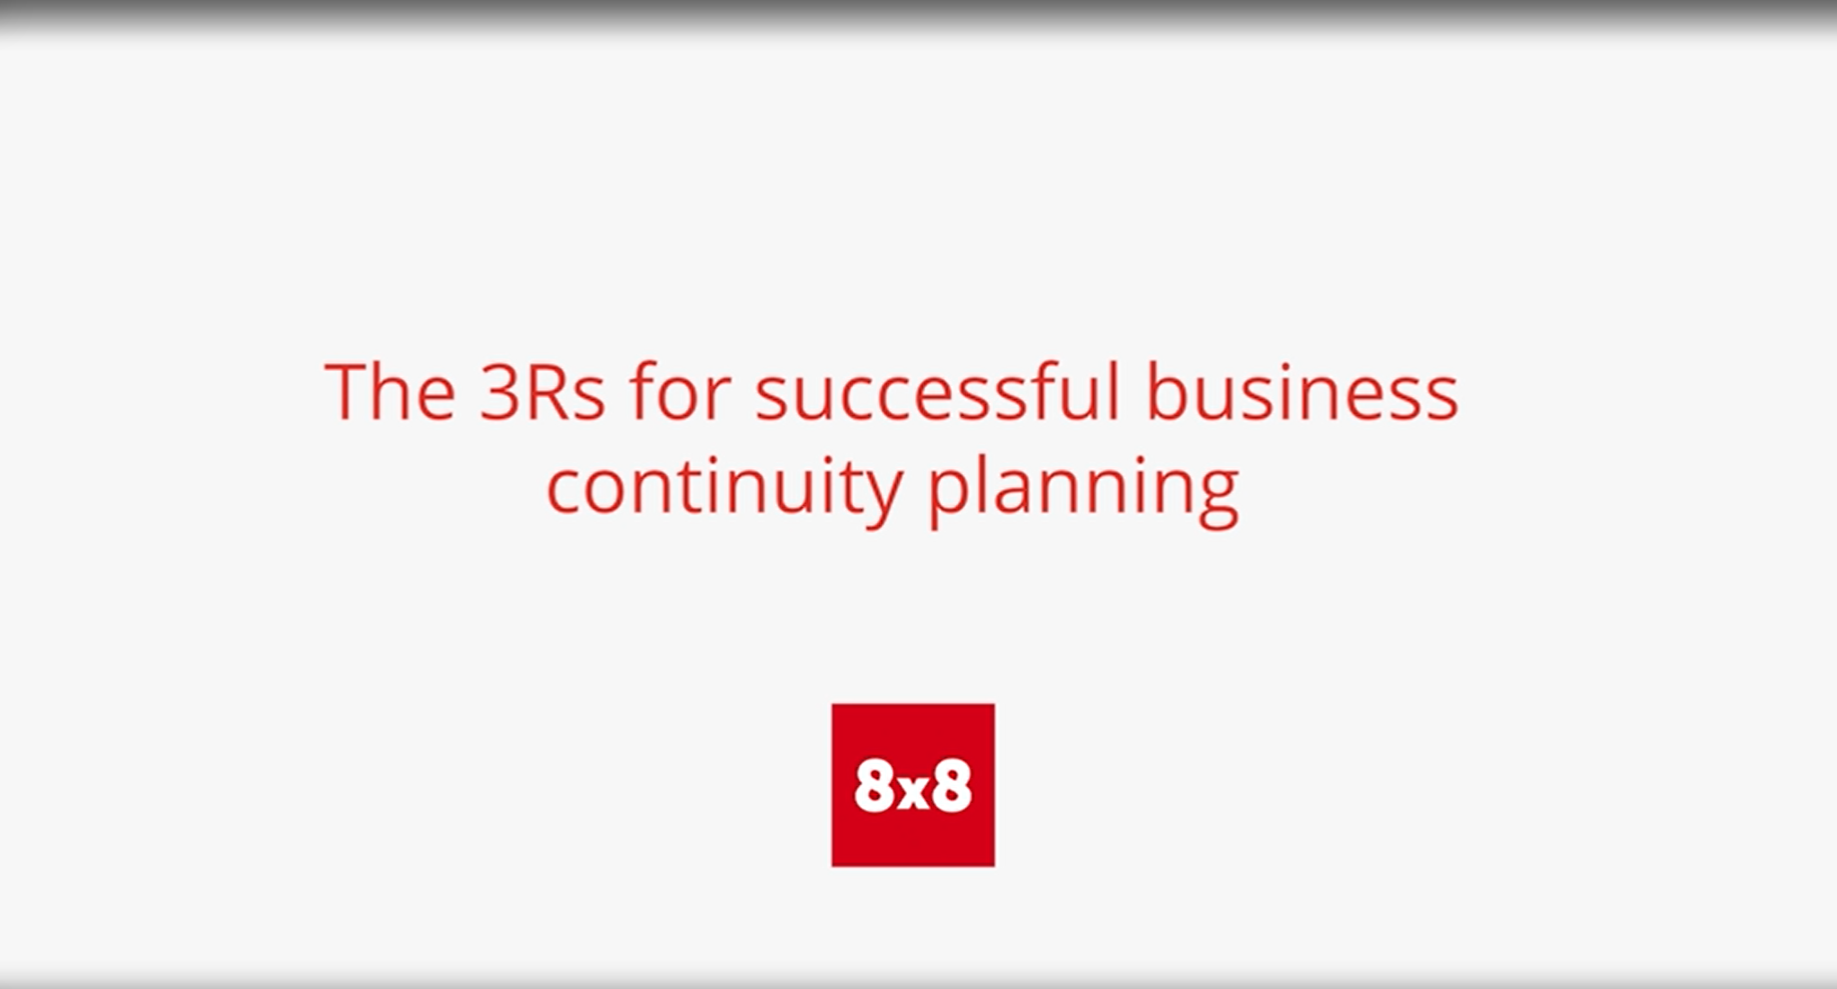 The 3Rs for Business Continuity Planning